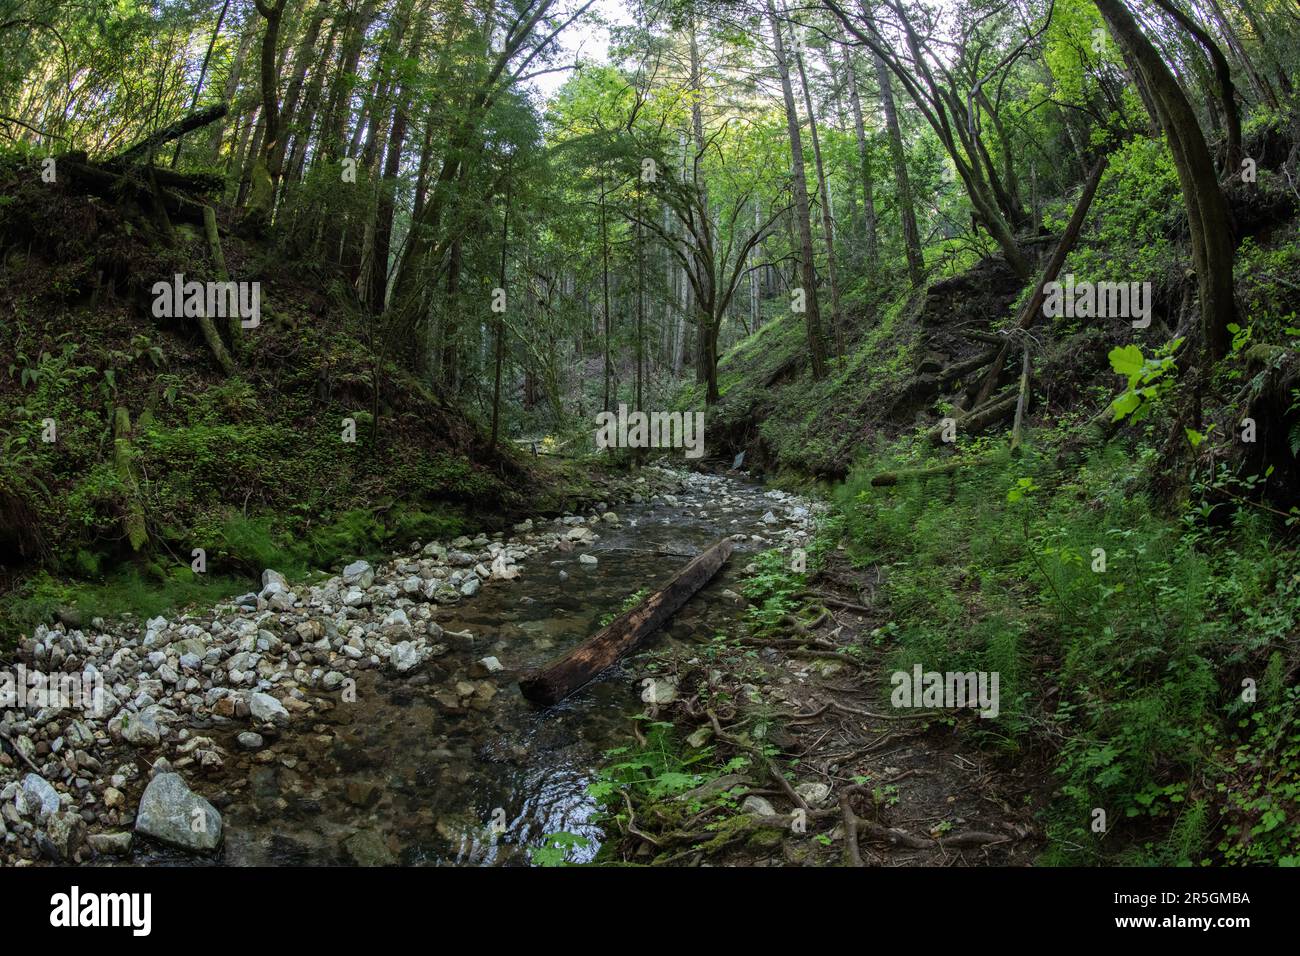 A stream runs through hills in Santa Cruz, California, the riparian ecosystem is lush and covered with trees and vegetation. Stock Photo